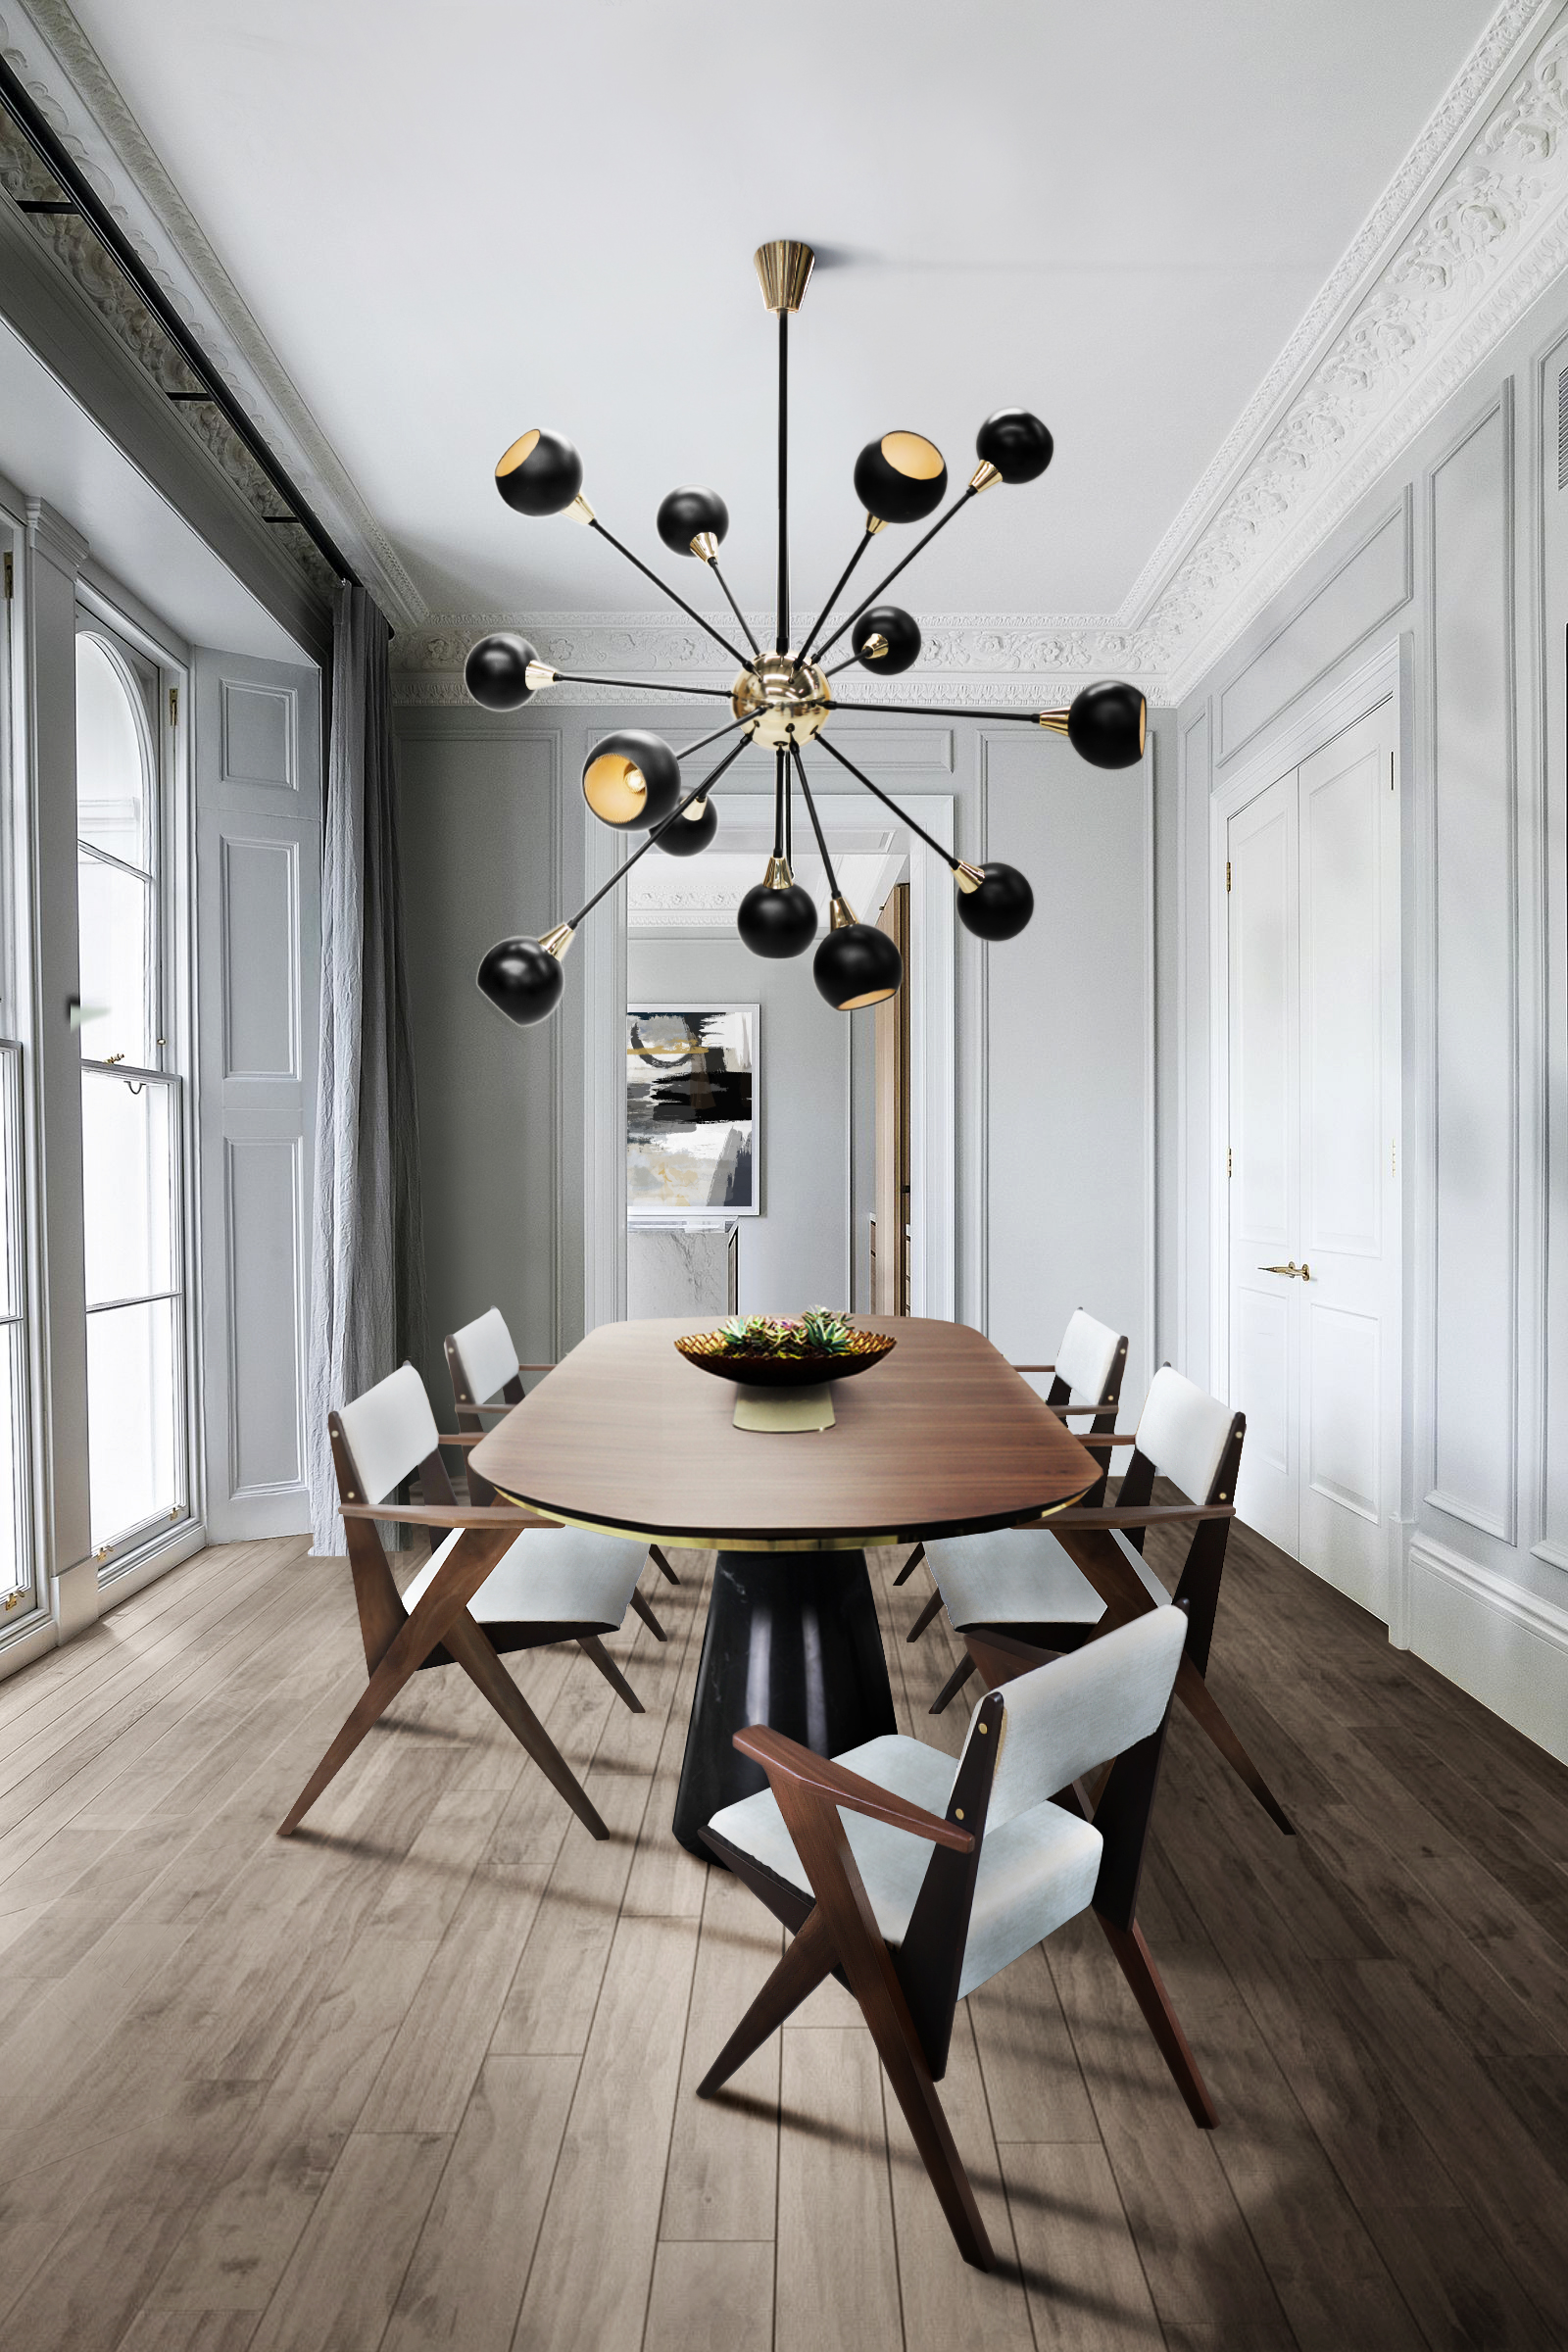 The Art of Choosing the Perfect Dining Room Chairs